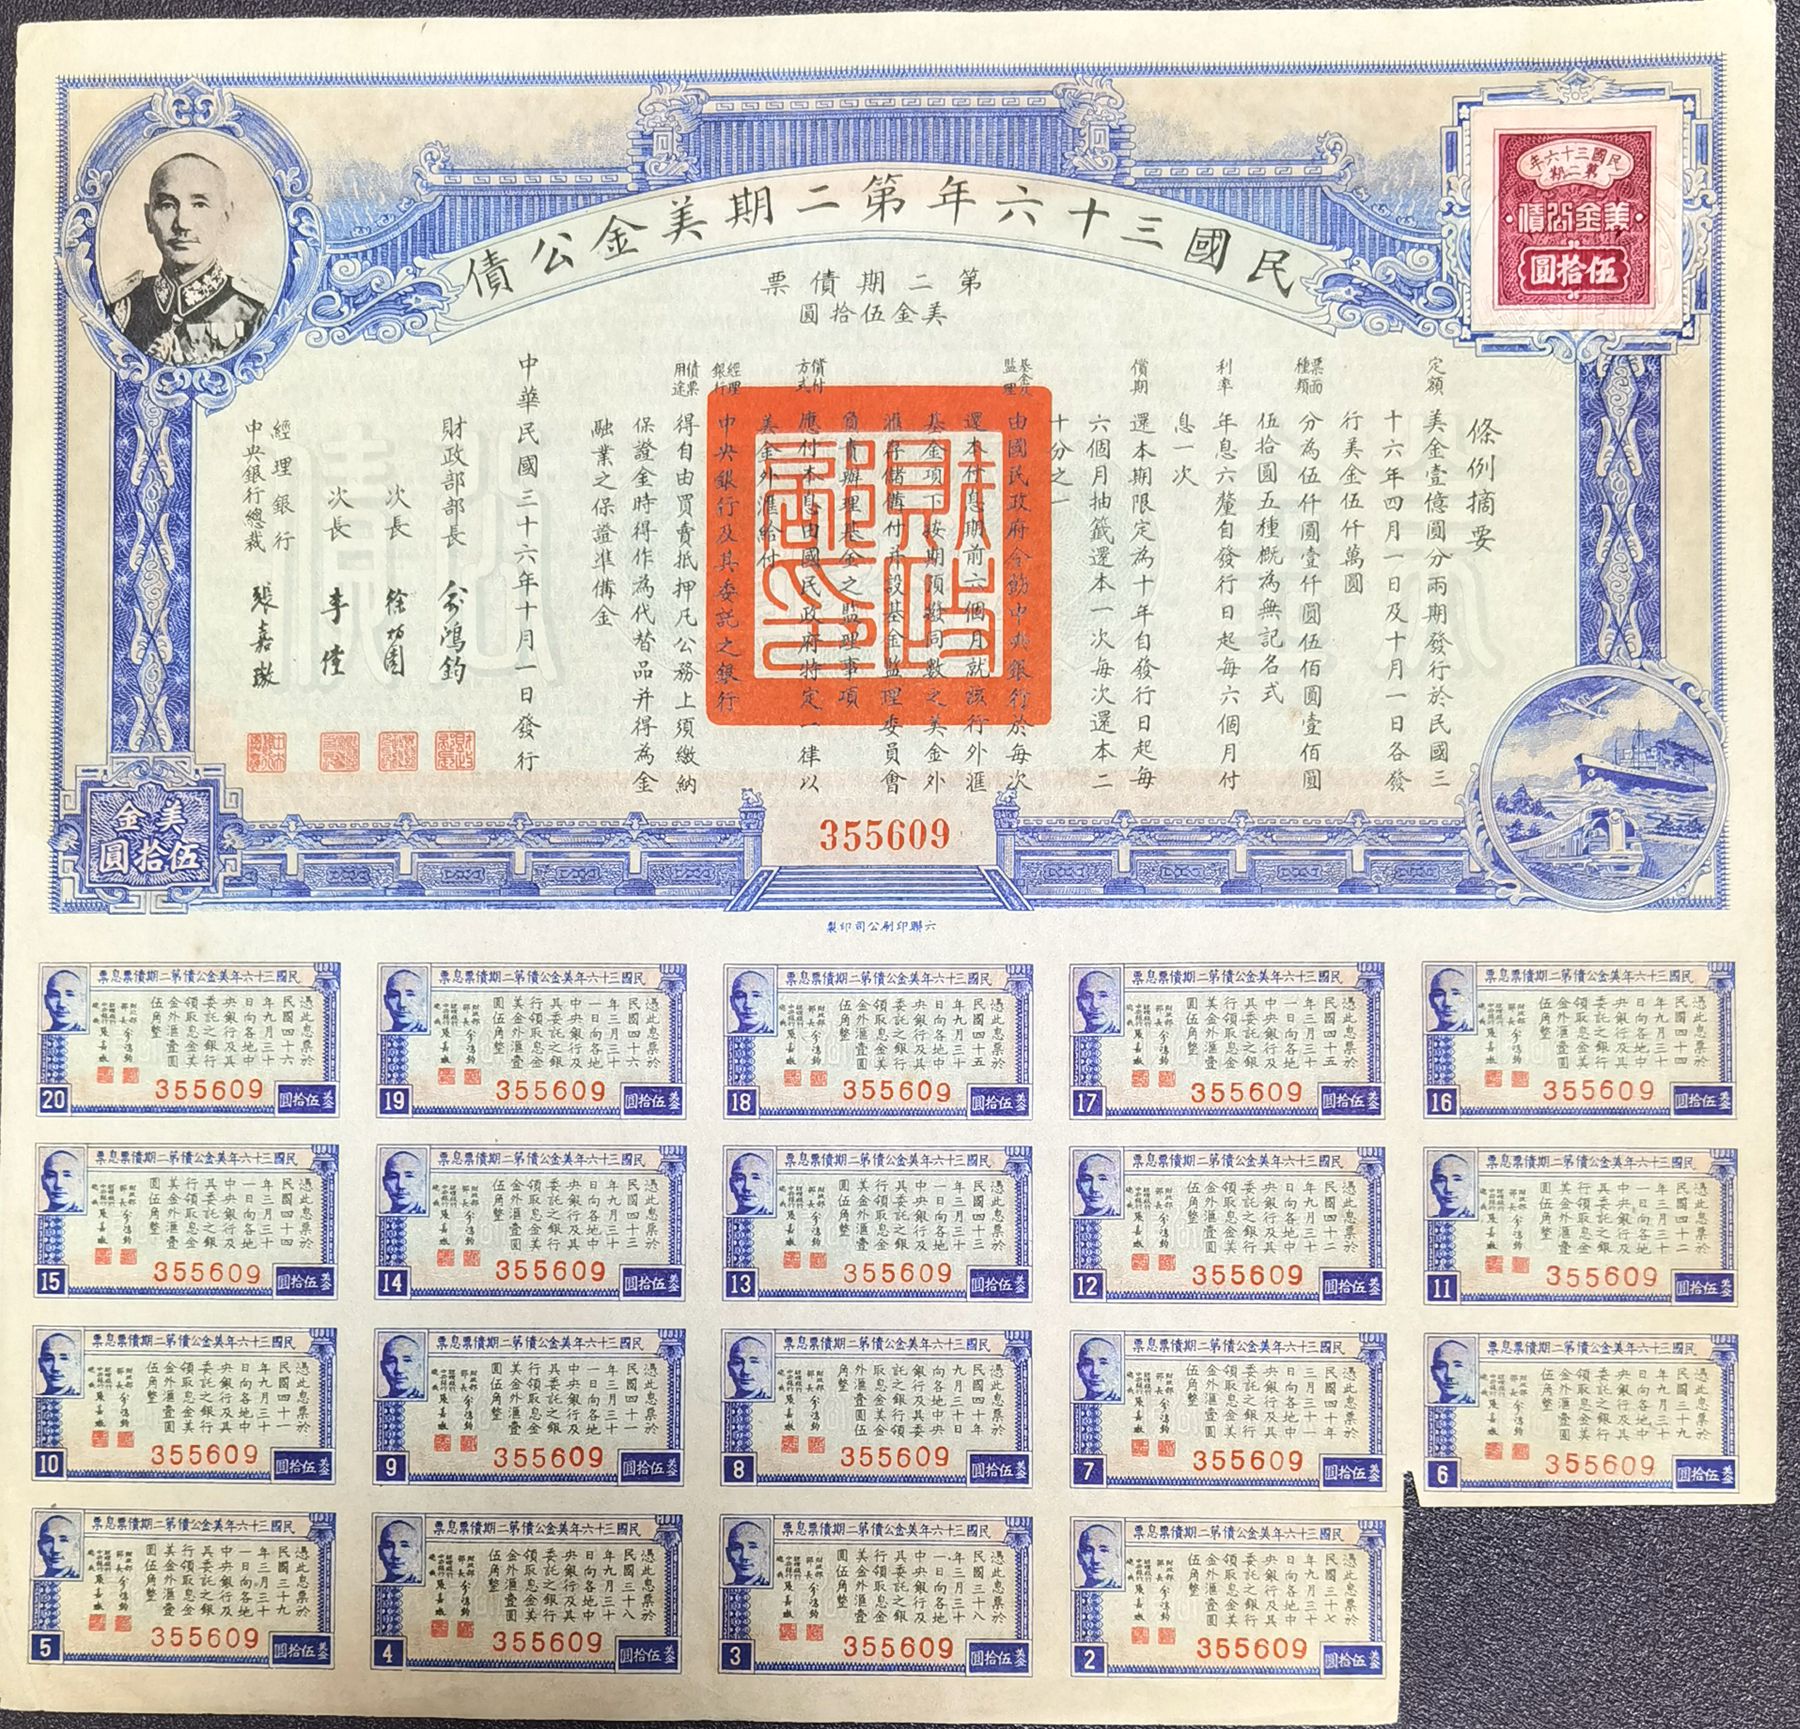 B2096, China 6% U.S.Gold Bond of 1947, USD 50 for Liberty (Second Issuing)